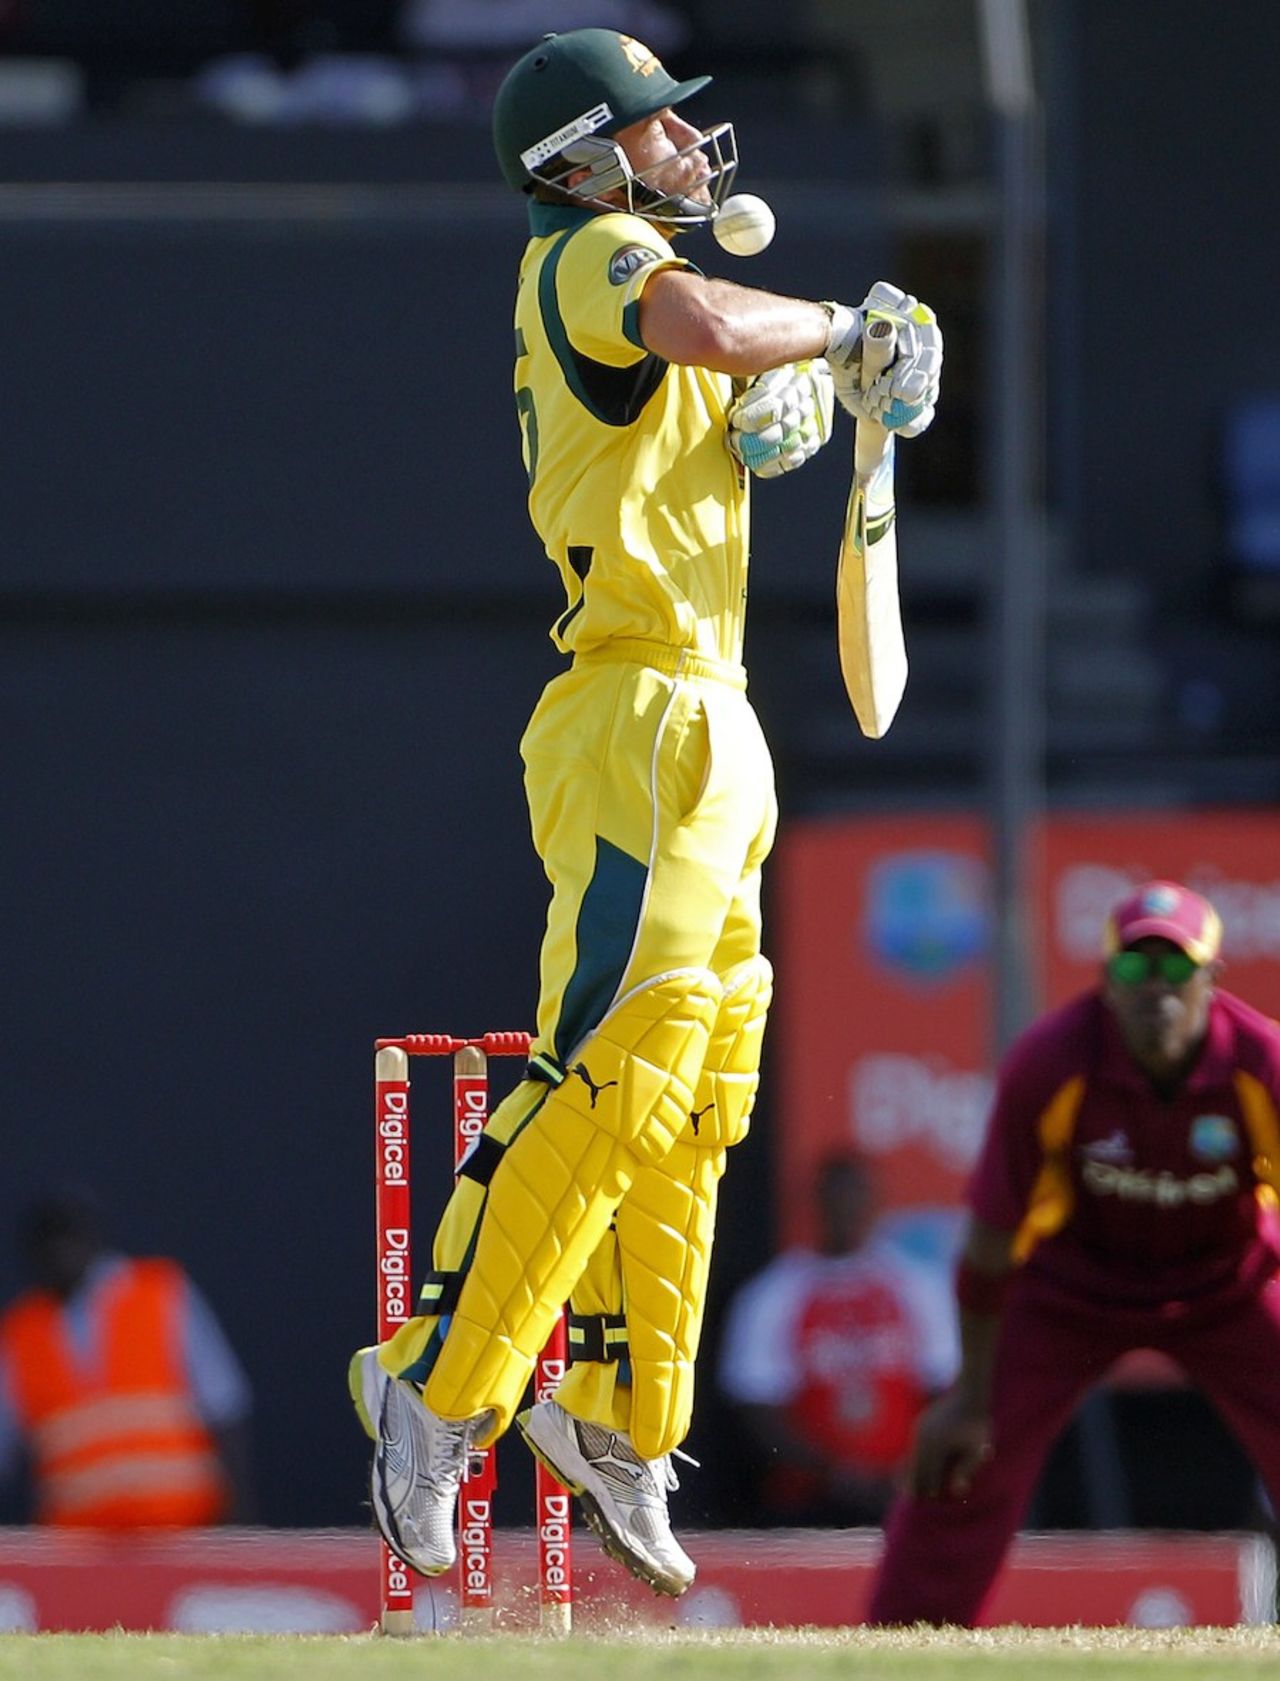 Matthew Wade smells leather, West Indies v Australia, 4th ODI, Gros Islet, March 23, 2012